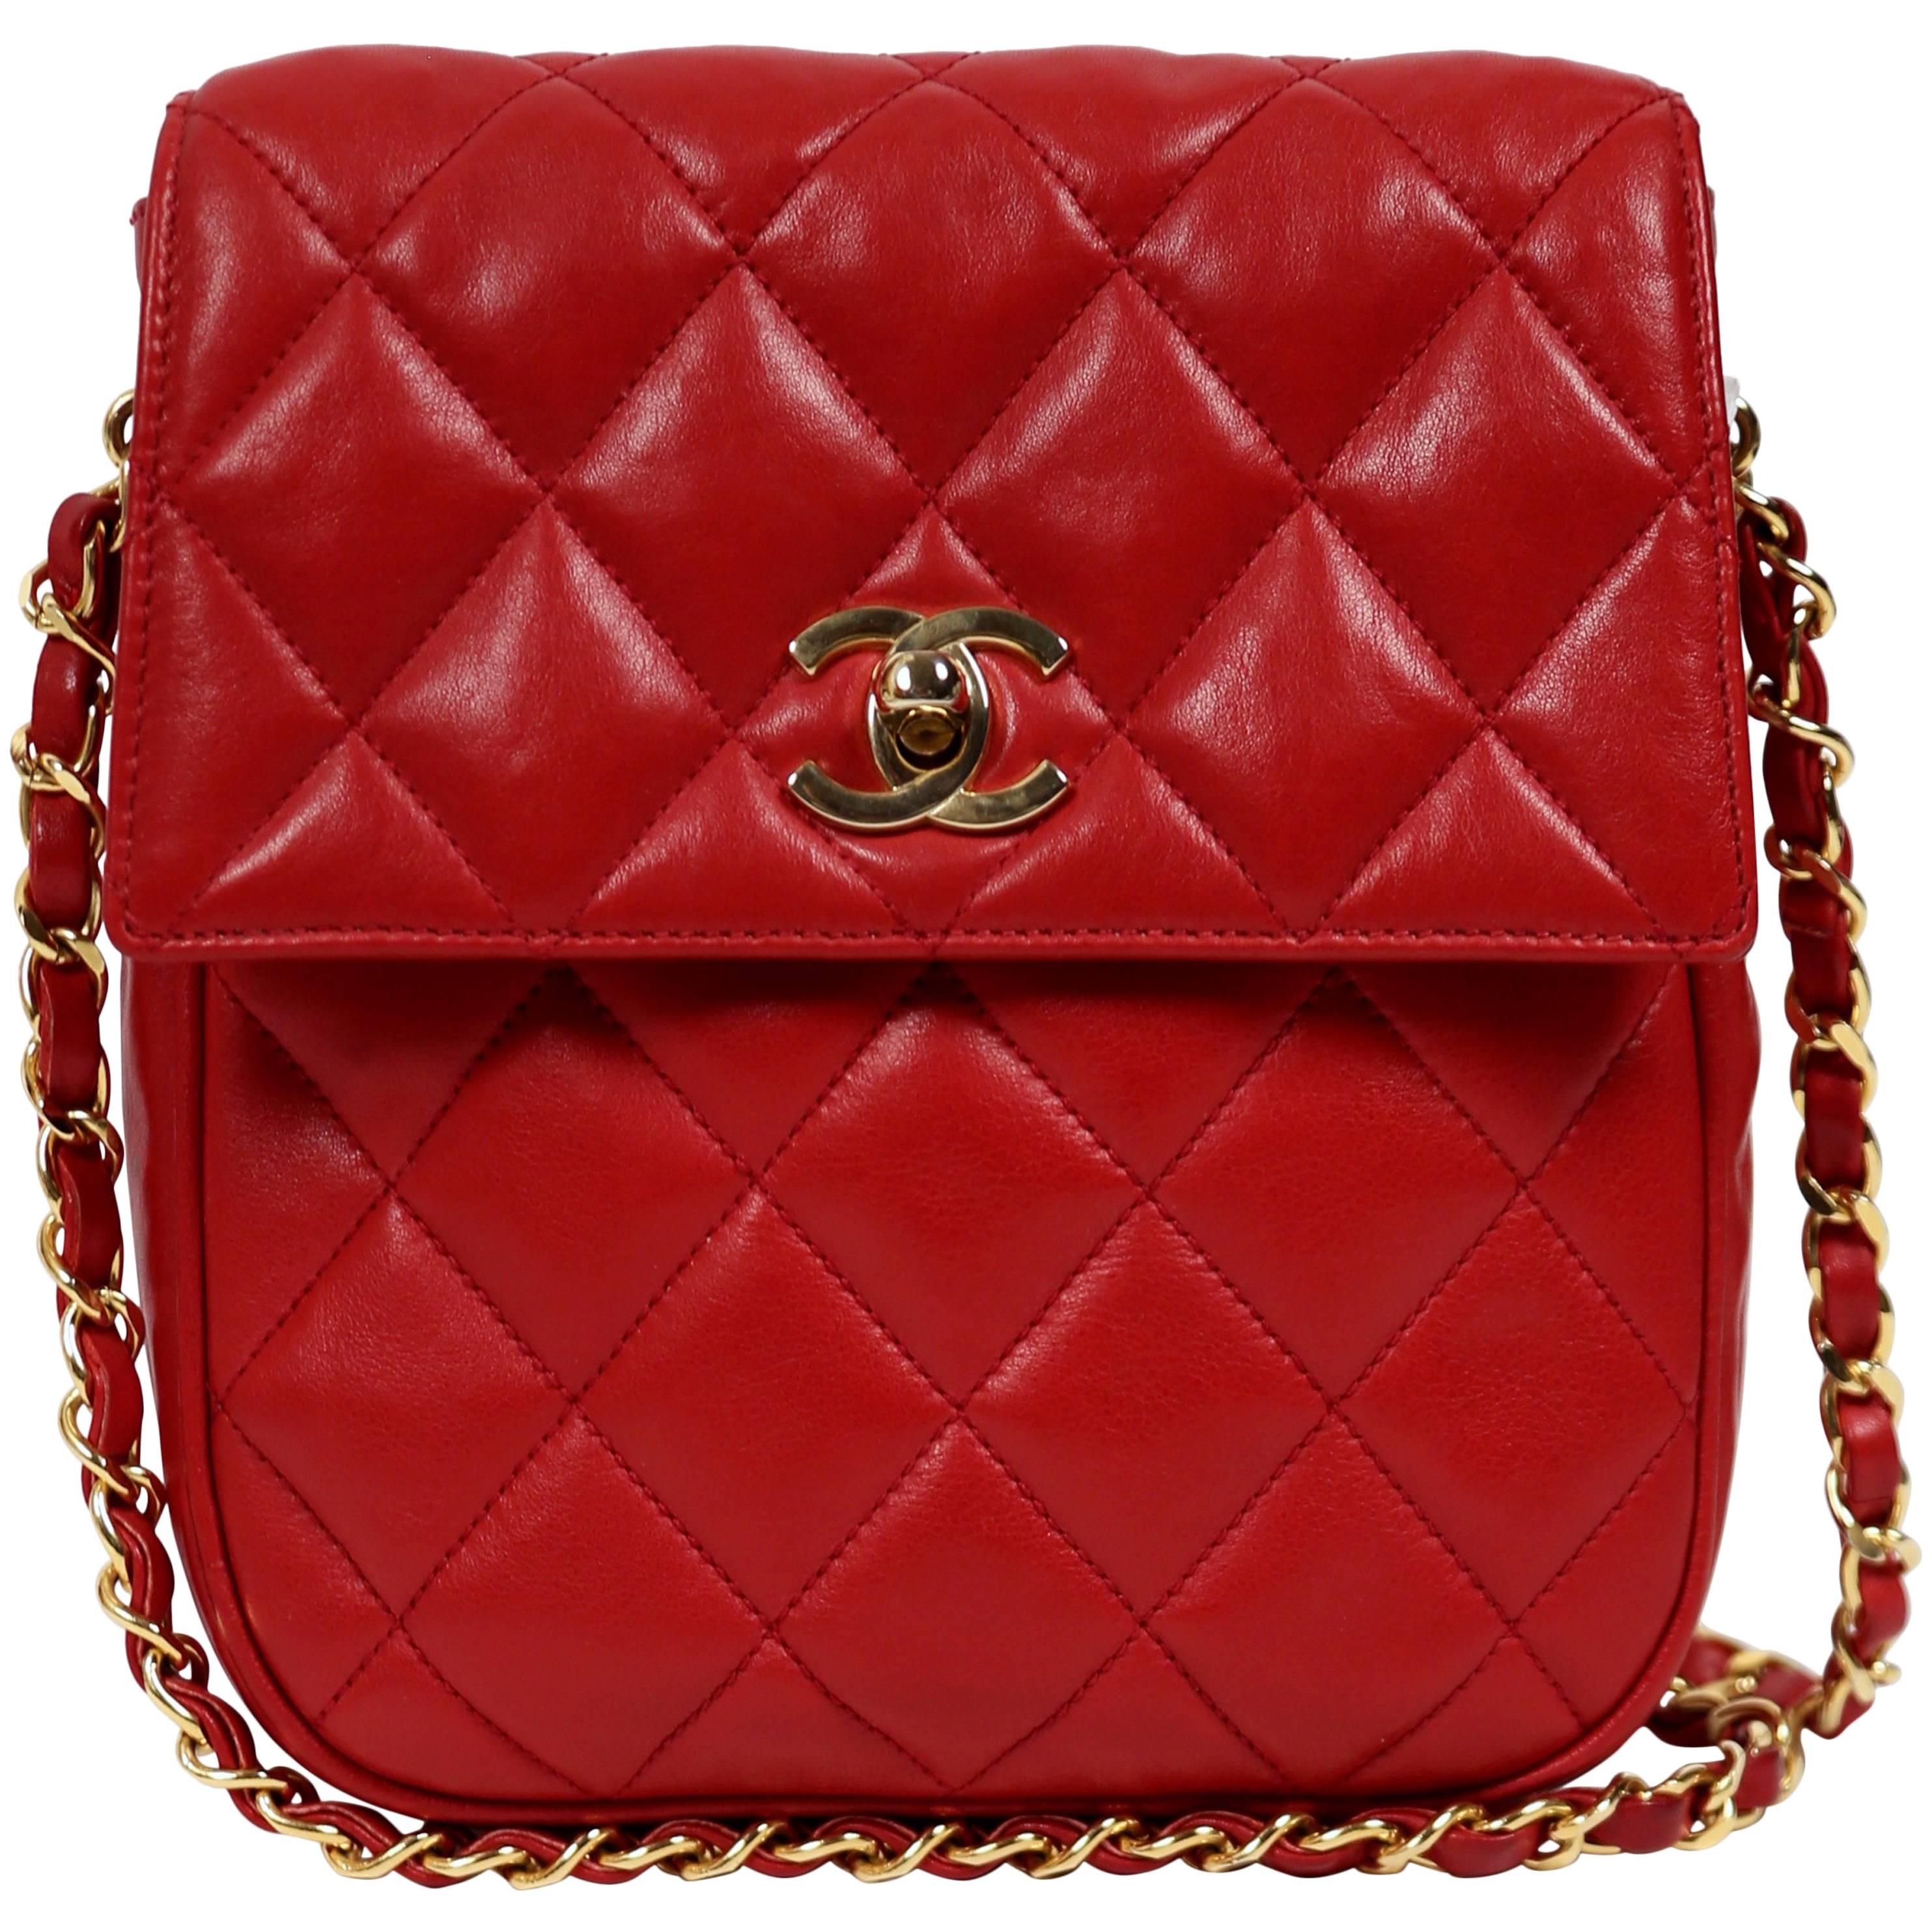 1980's CHANEL red quilted leather satchel bag with gold CC turnlock